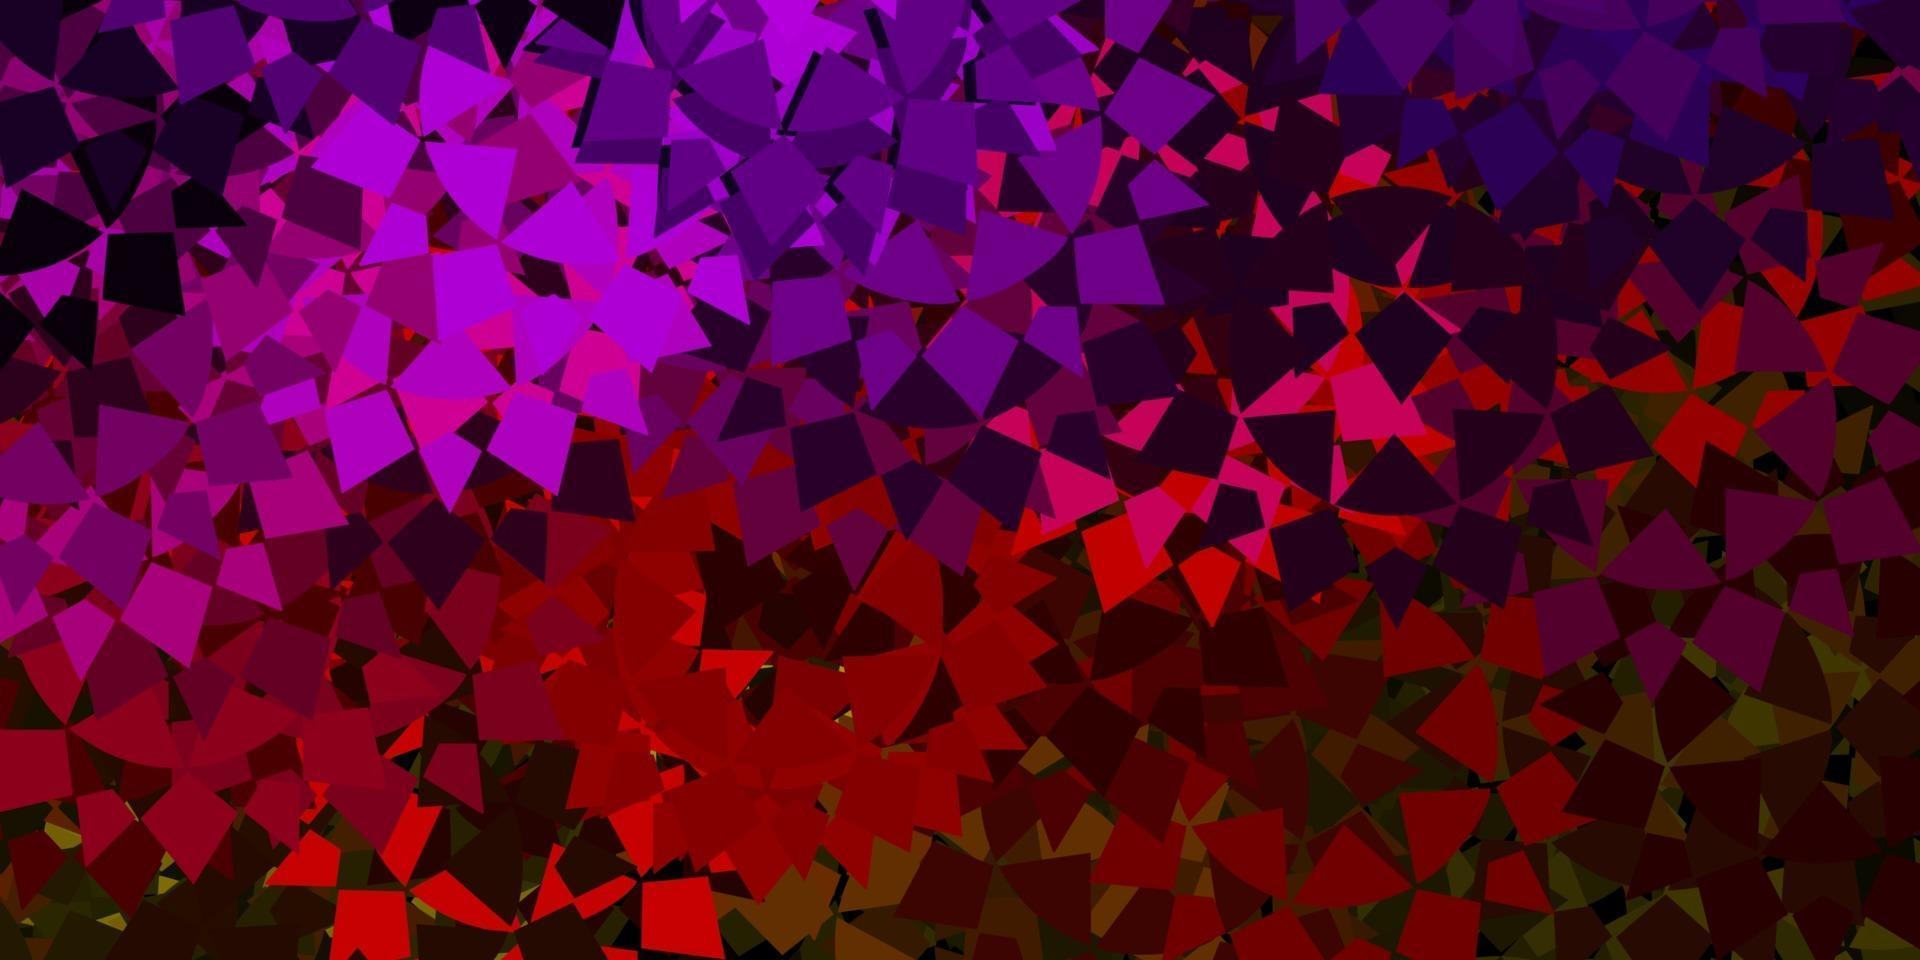 Dark pink, yellow vector background with polygonal forms.